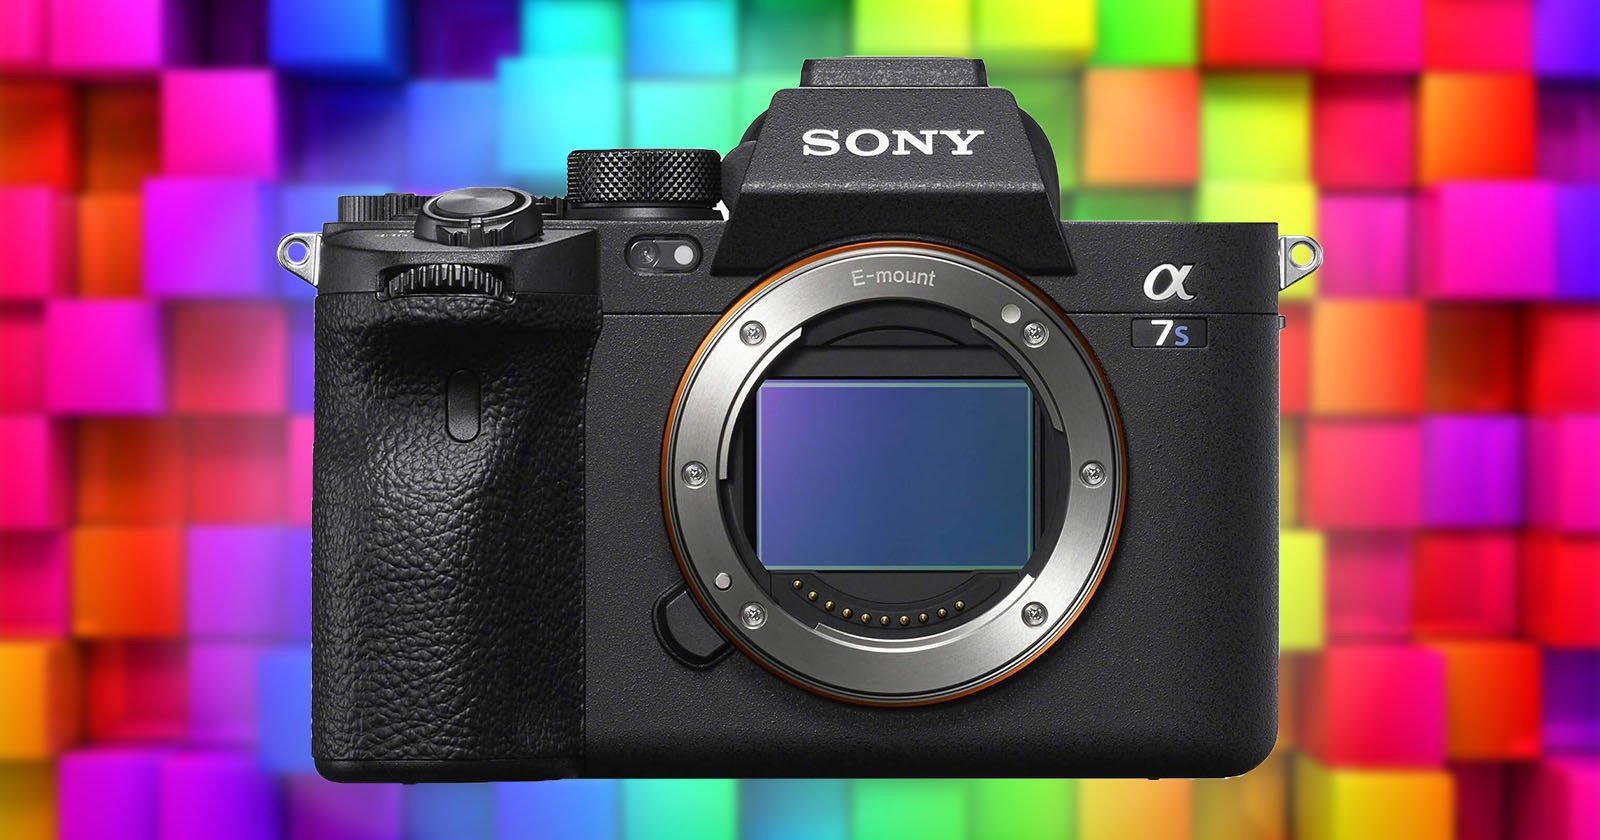 Petition Goals to Convey Tailor made LUTs to the Sony a7S III